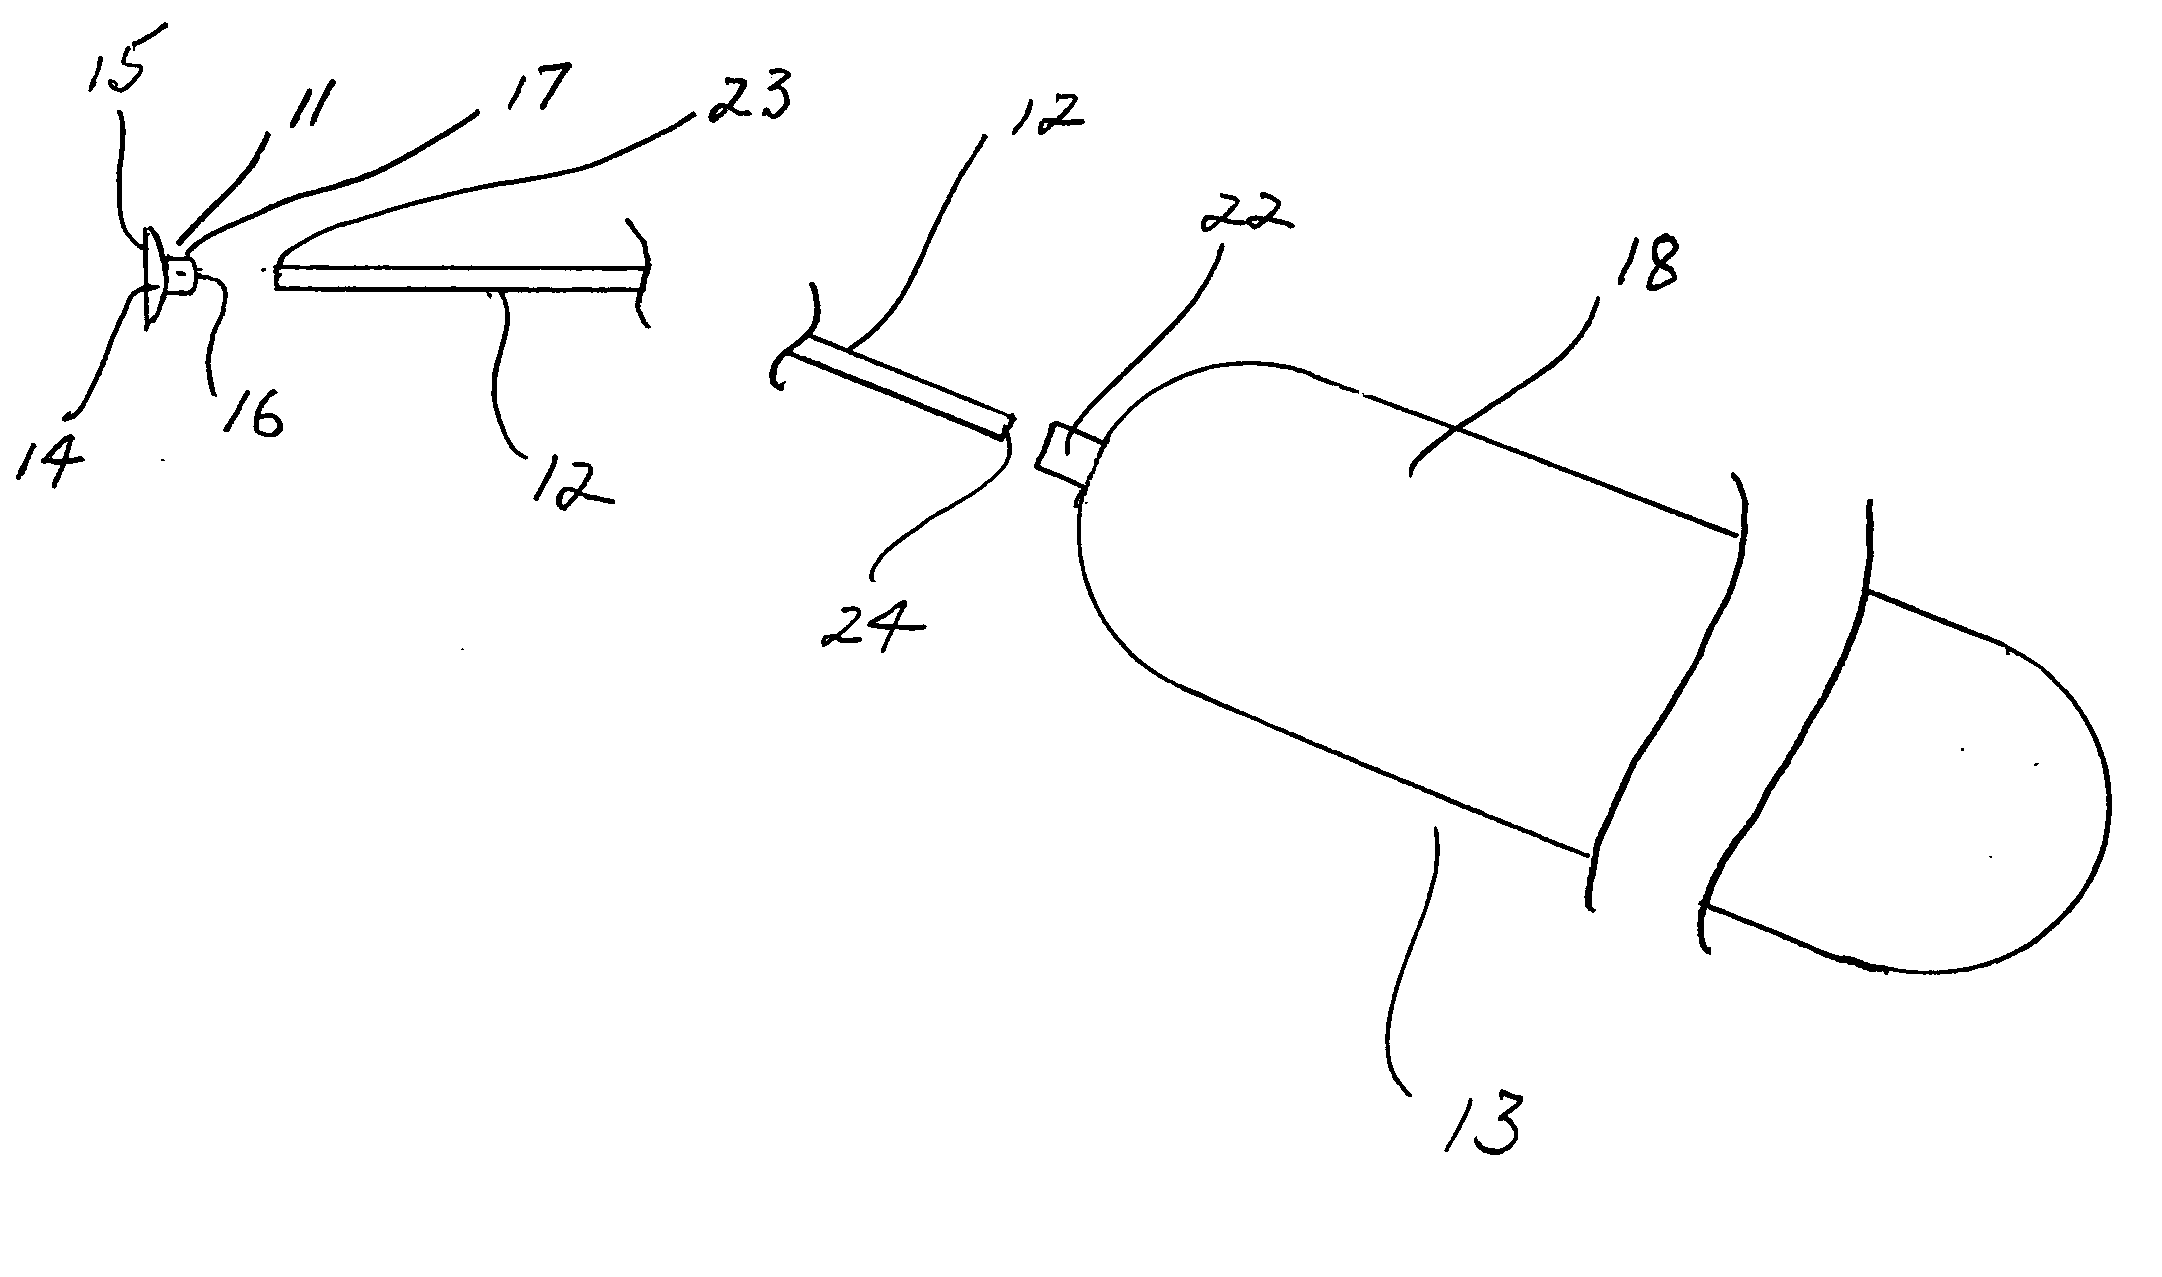 Contact lens insertion and removal device